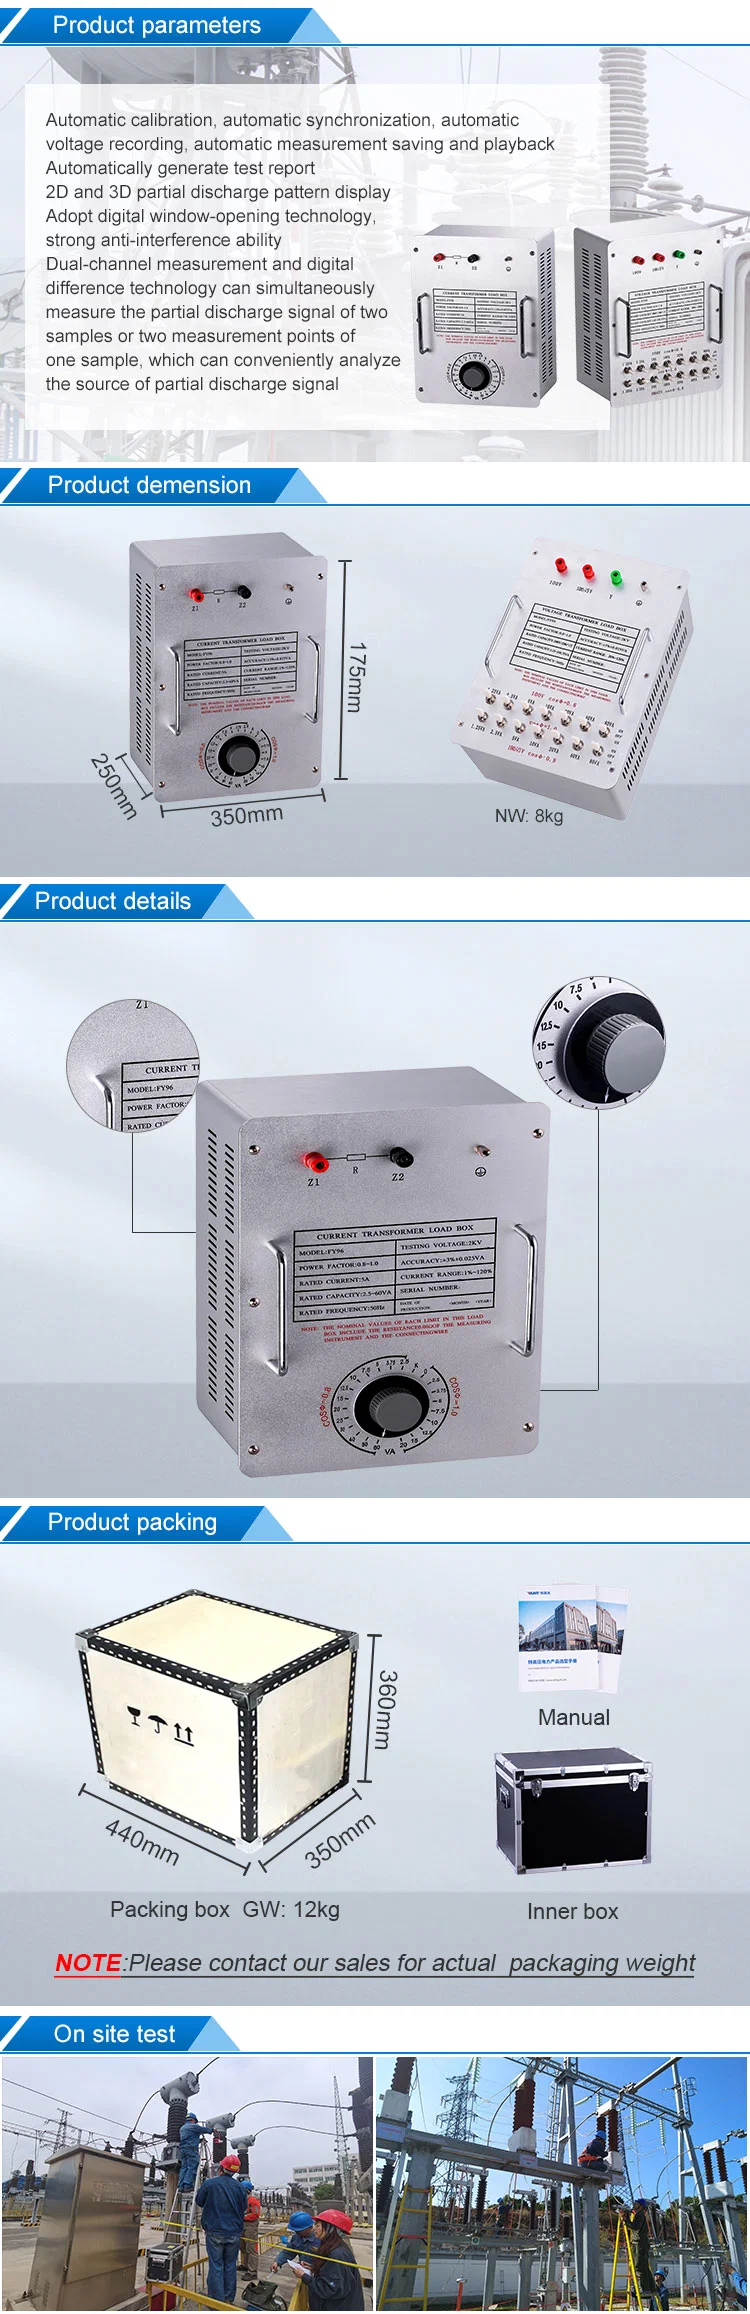 Fy-H Automatic Test Transformer Controller/Power Control Box for Hipot Test Set